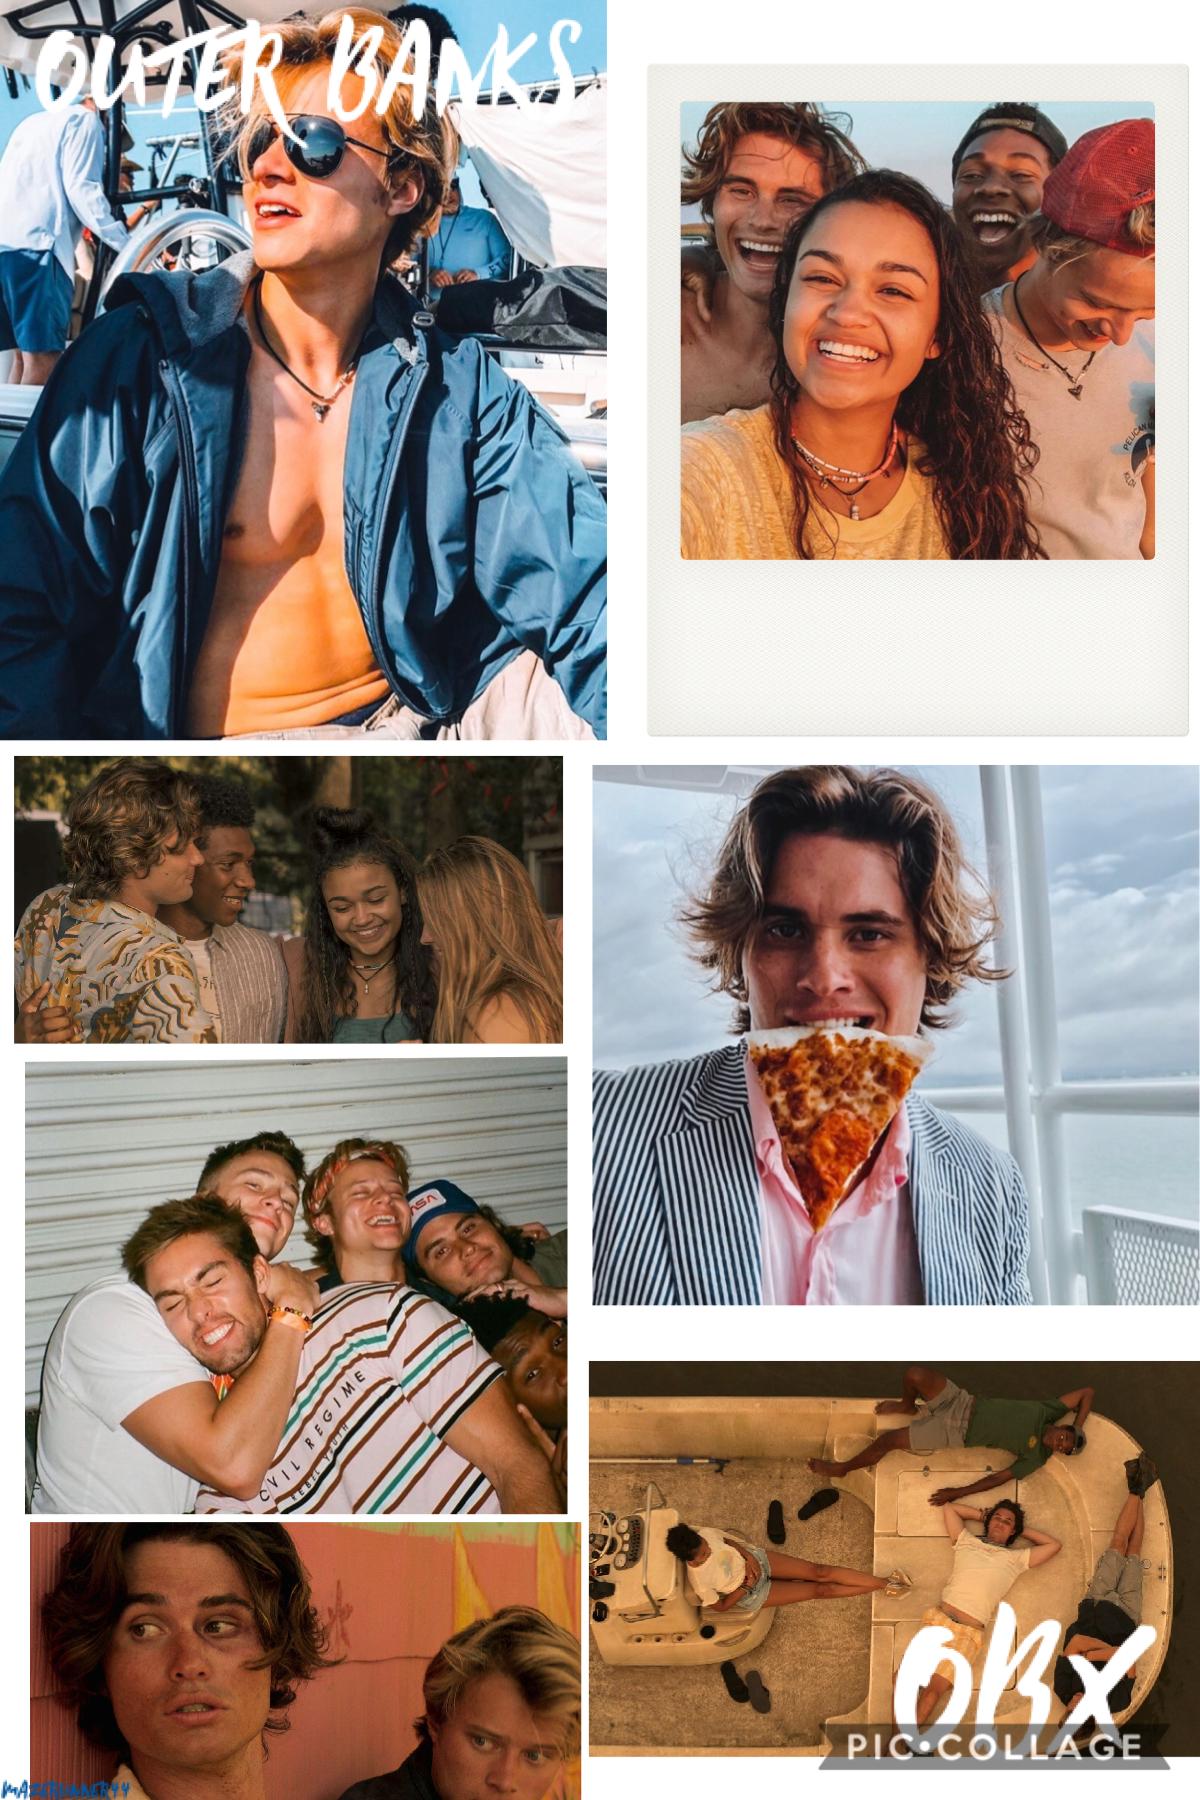 🌊Tap🌊
So I watched outer banks and am now in love, and I made this bc I am really bored in quarantine. Comment you me favorite tv show right now.